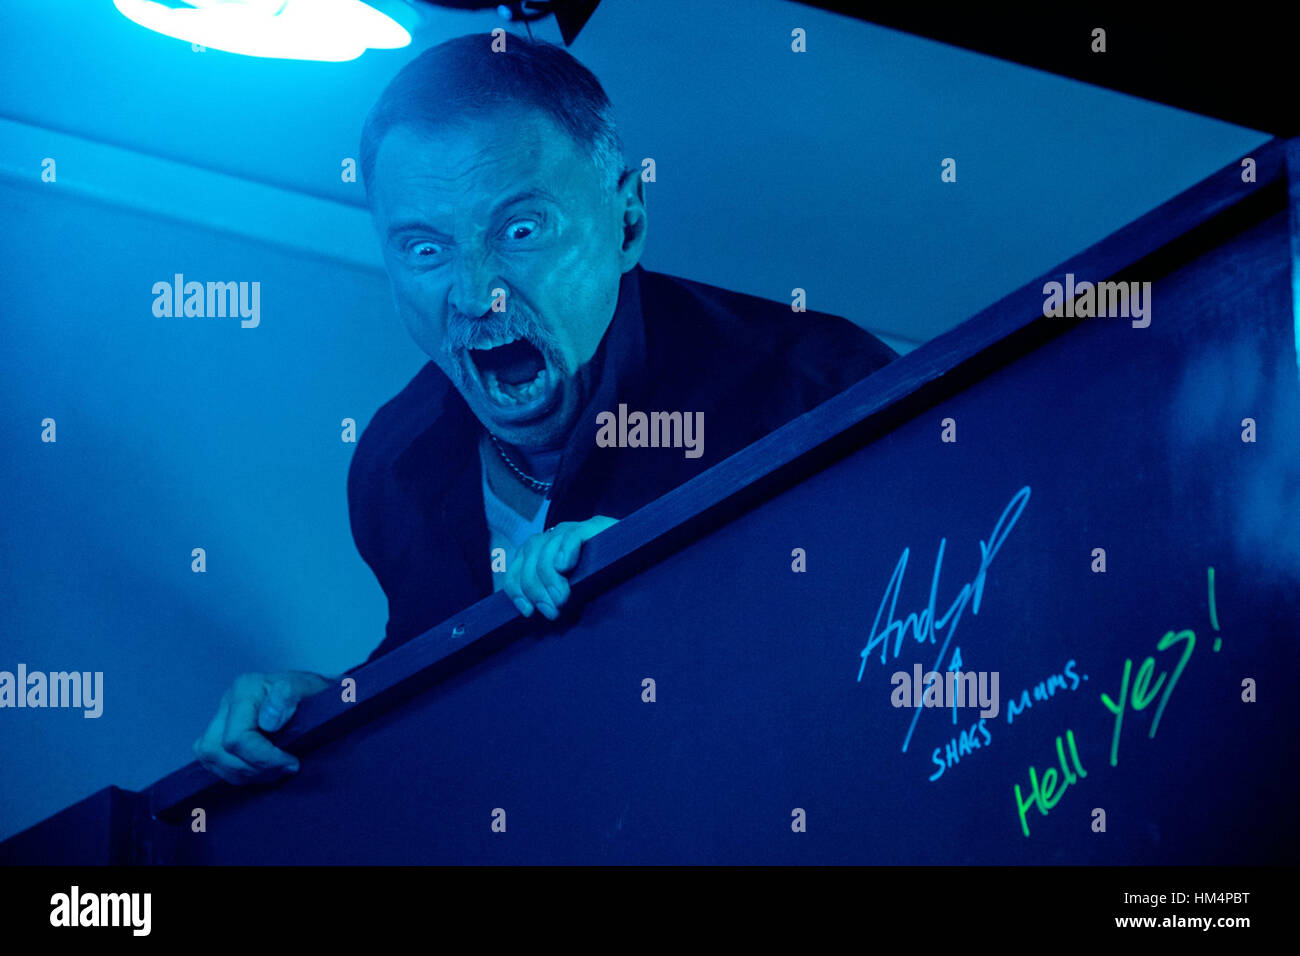 T2 TRAINSPOTTING (2016) ROBERT CARLYLE DANNY BOYLE (DIR) TRISTAR PICTURES/MOVIESTORE COLLECTION LTD Stock Photo